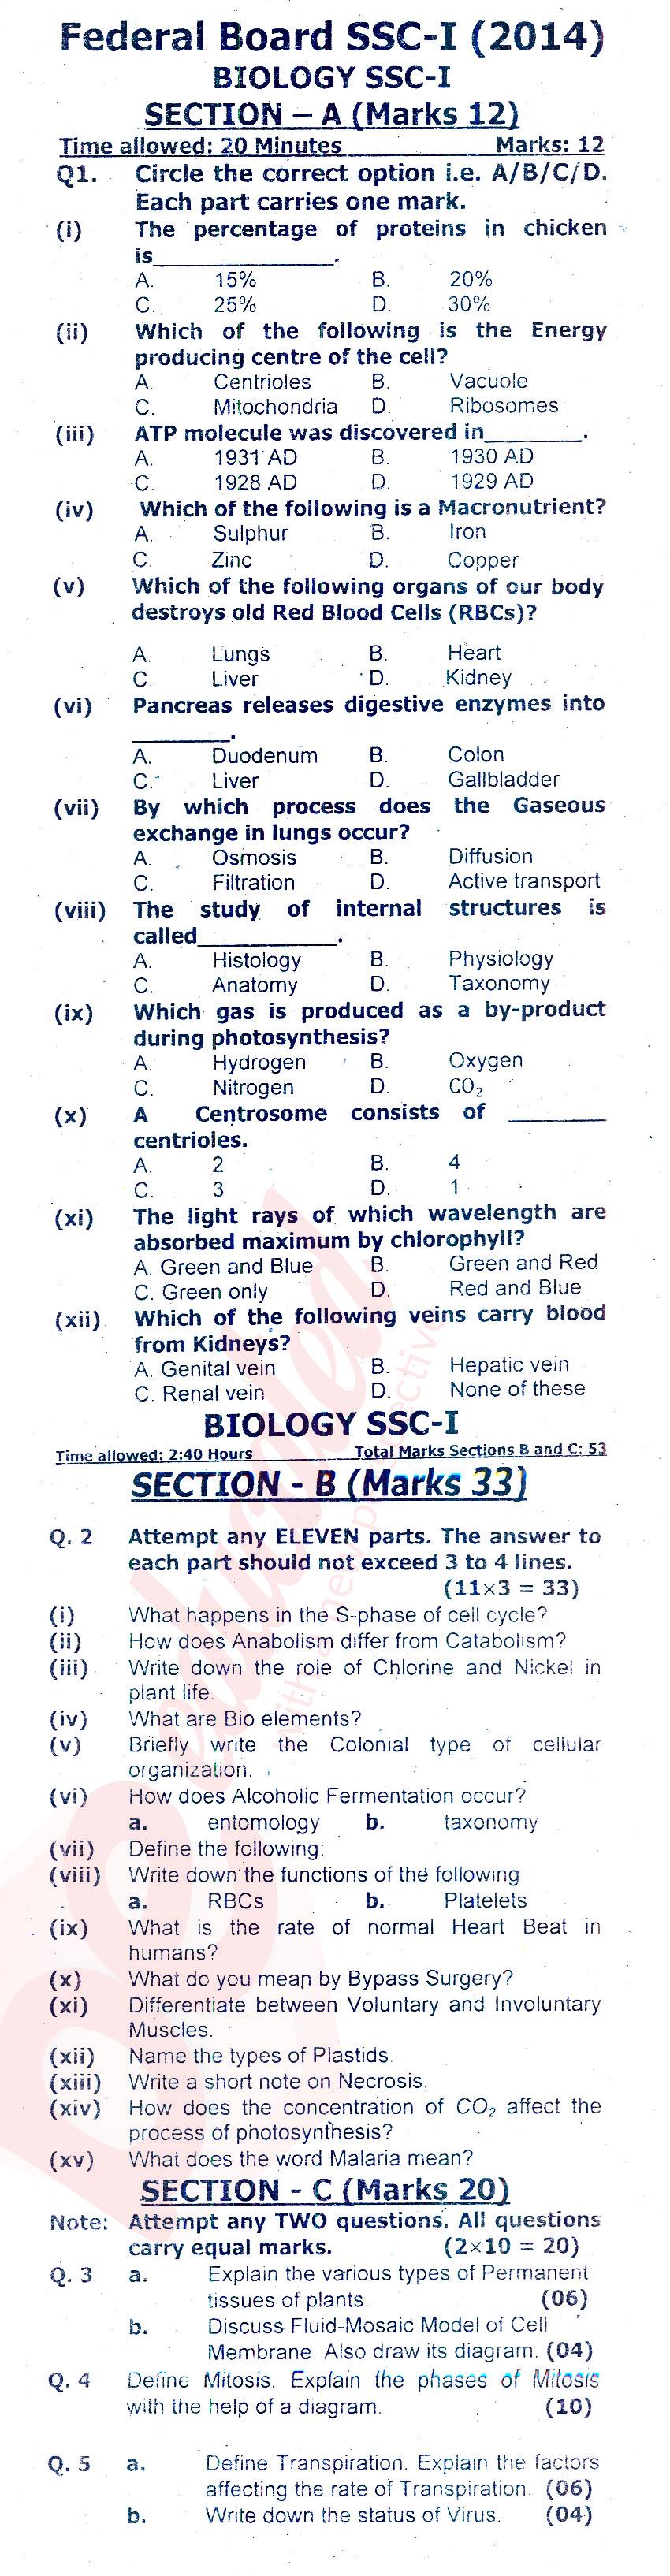 Biology 9th class Past Paper Group 1 Federal BISE  2014